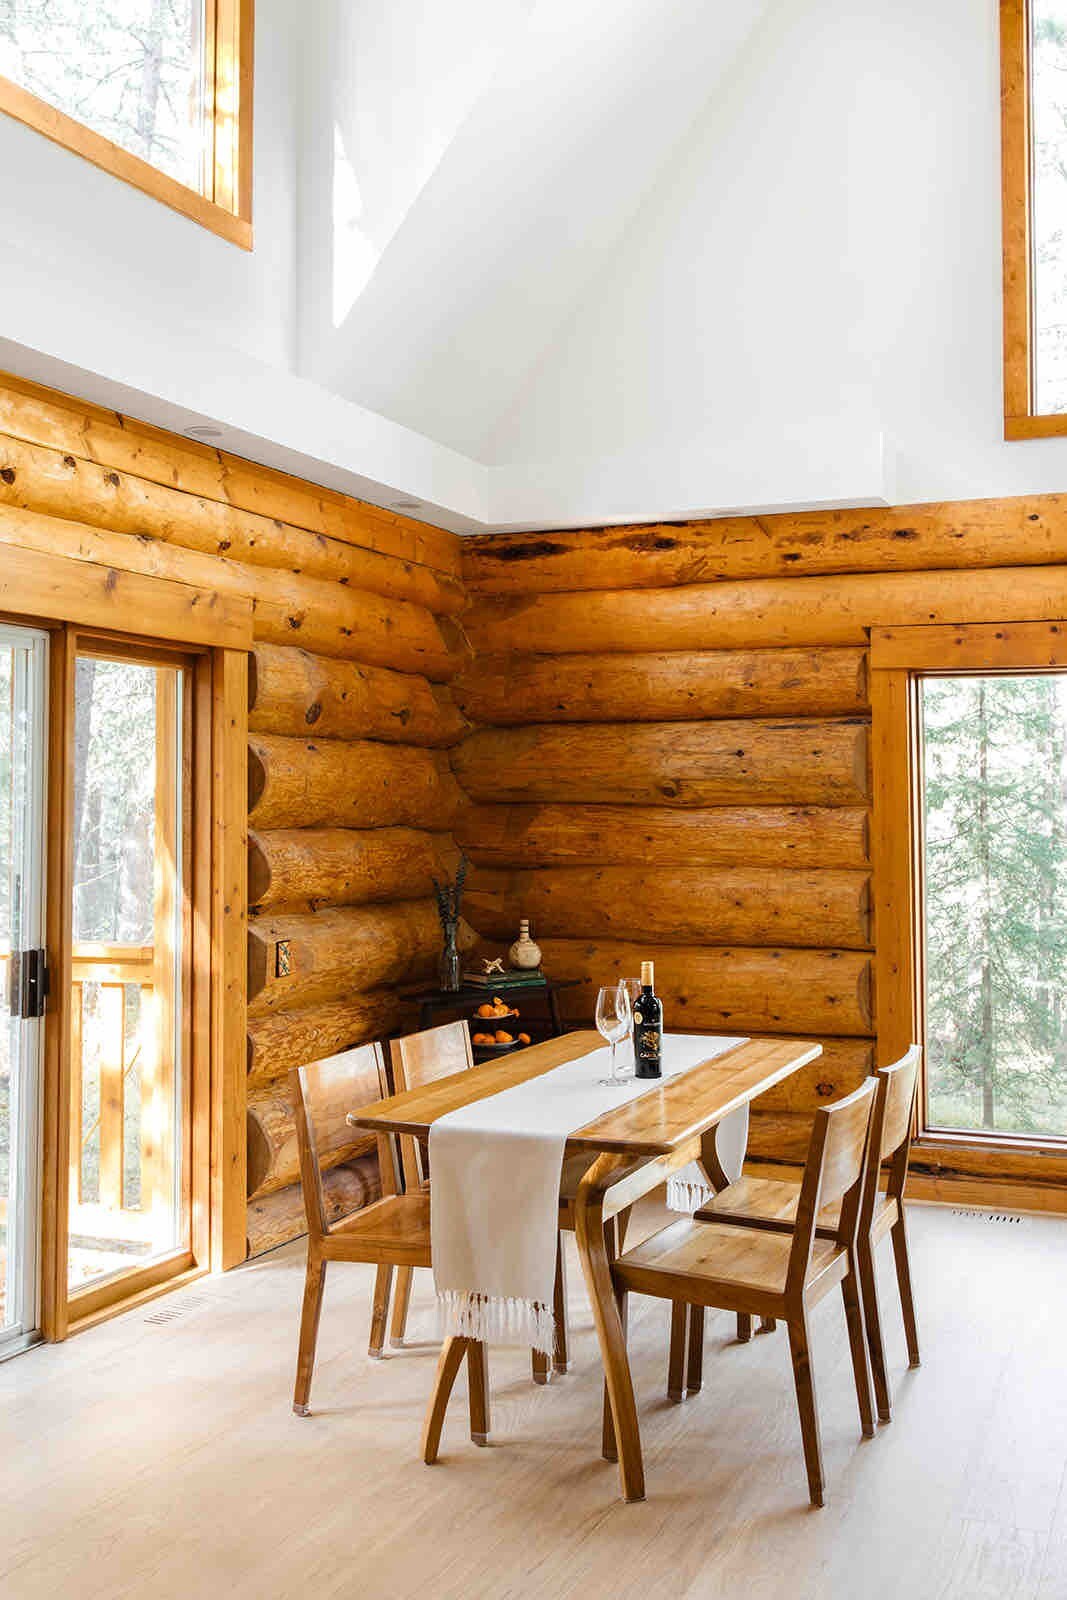 3BR Private Modern Log Cabin Nested In The Woods